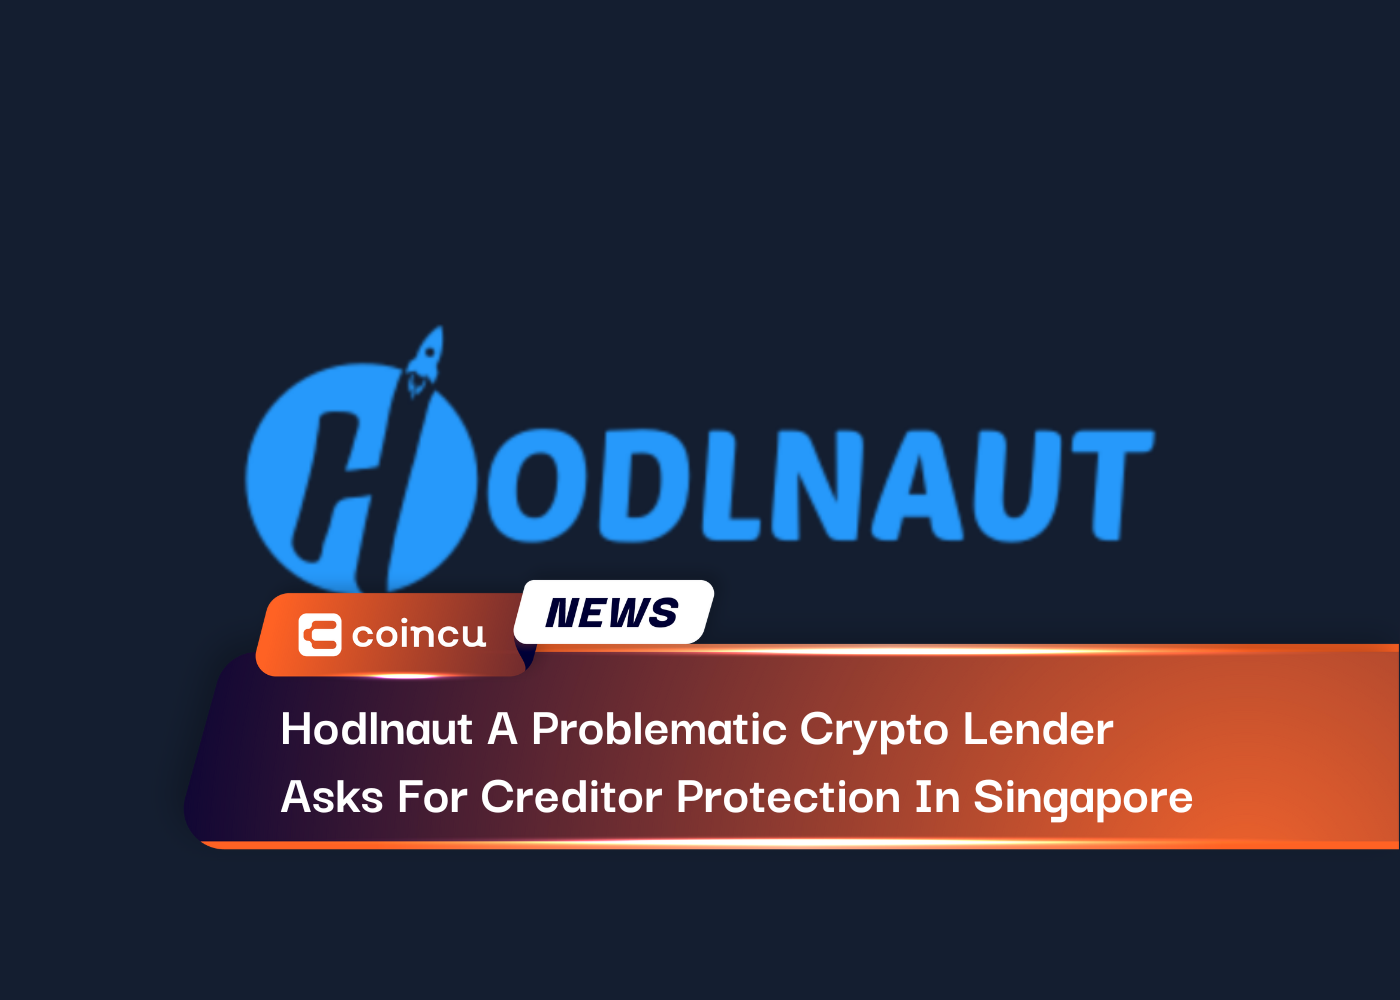 Hodlnaut A Problematic Crypto Lender